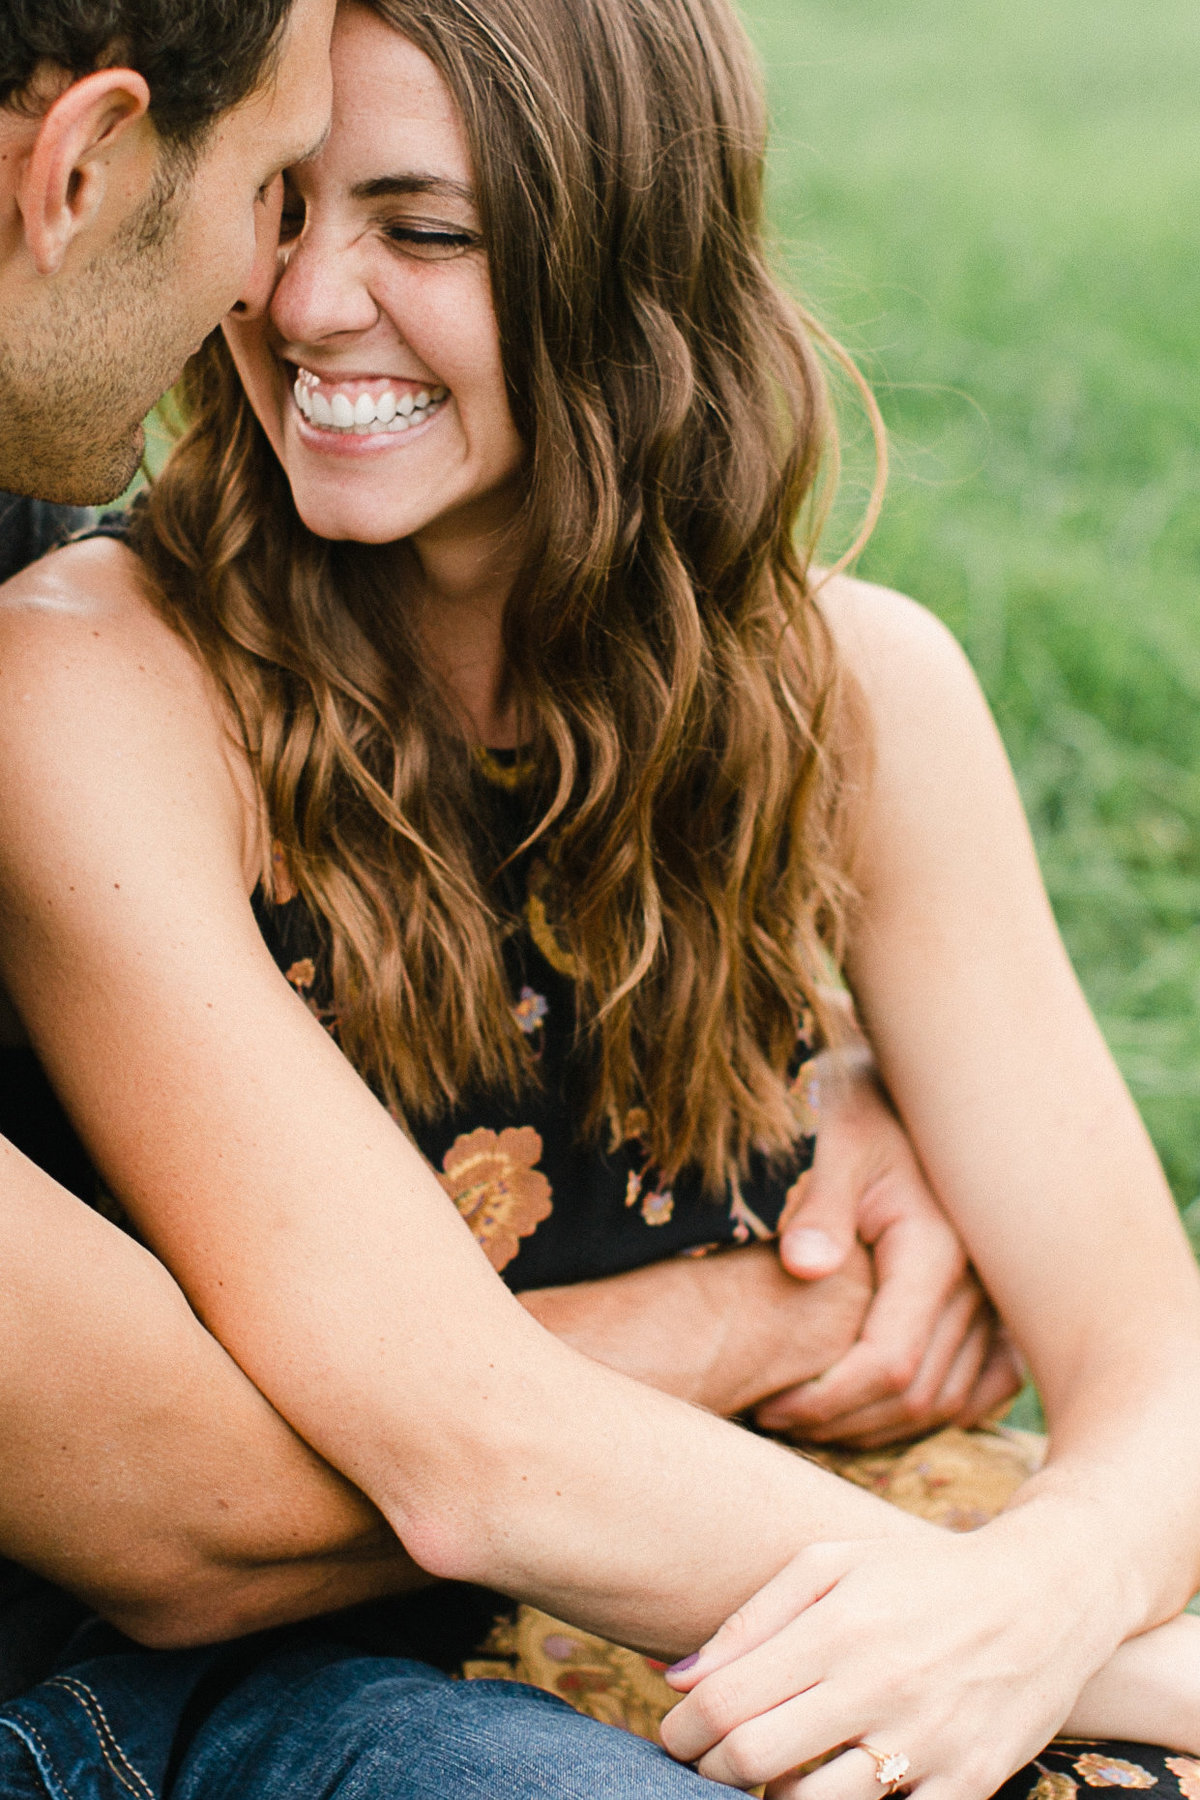 shelby_micah_engaged-34